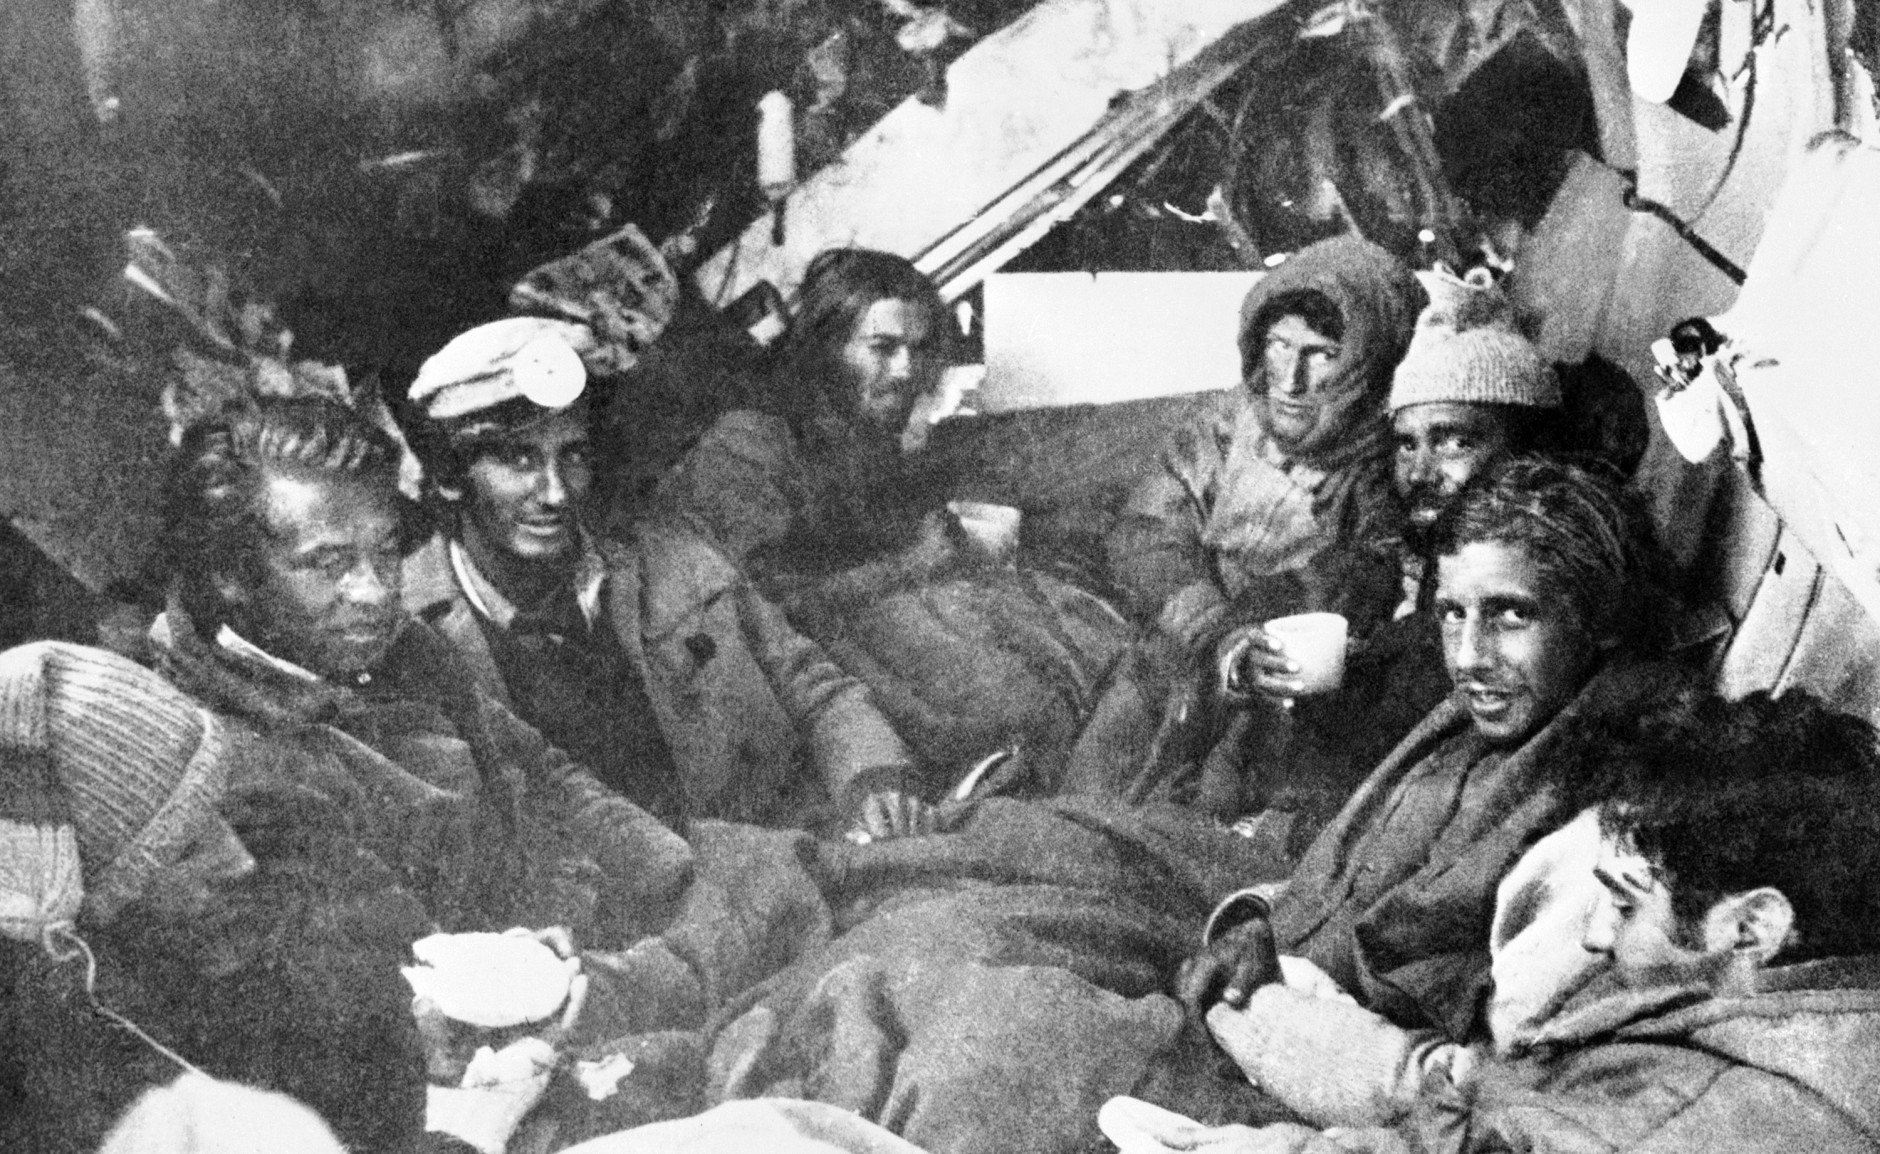 The last eight survivors of the Uruguayan Air Force plane crash in the Andes in South America, huddle together in the craft's fuselage on their final night before rescue on Dec. 27, 1972. A mountain rescue team brought them food. (AP Photo)